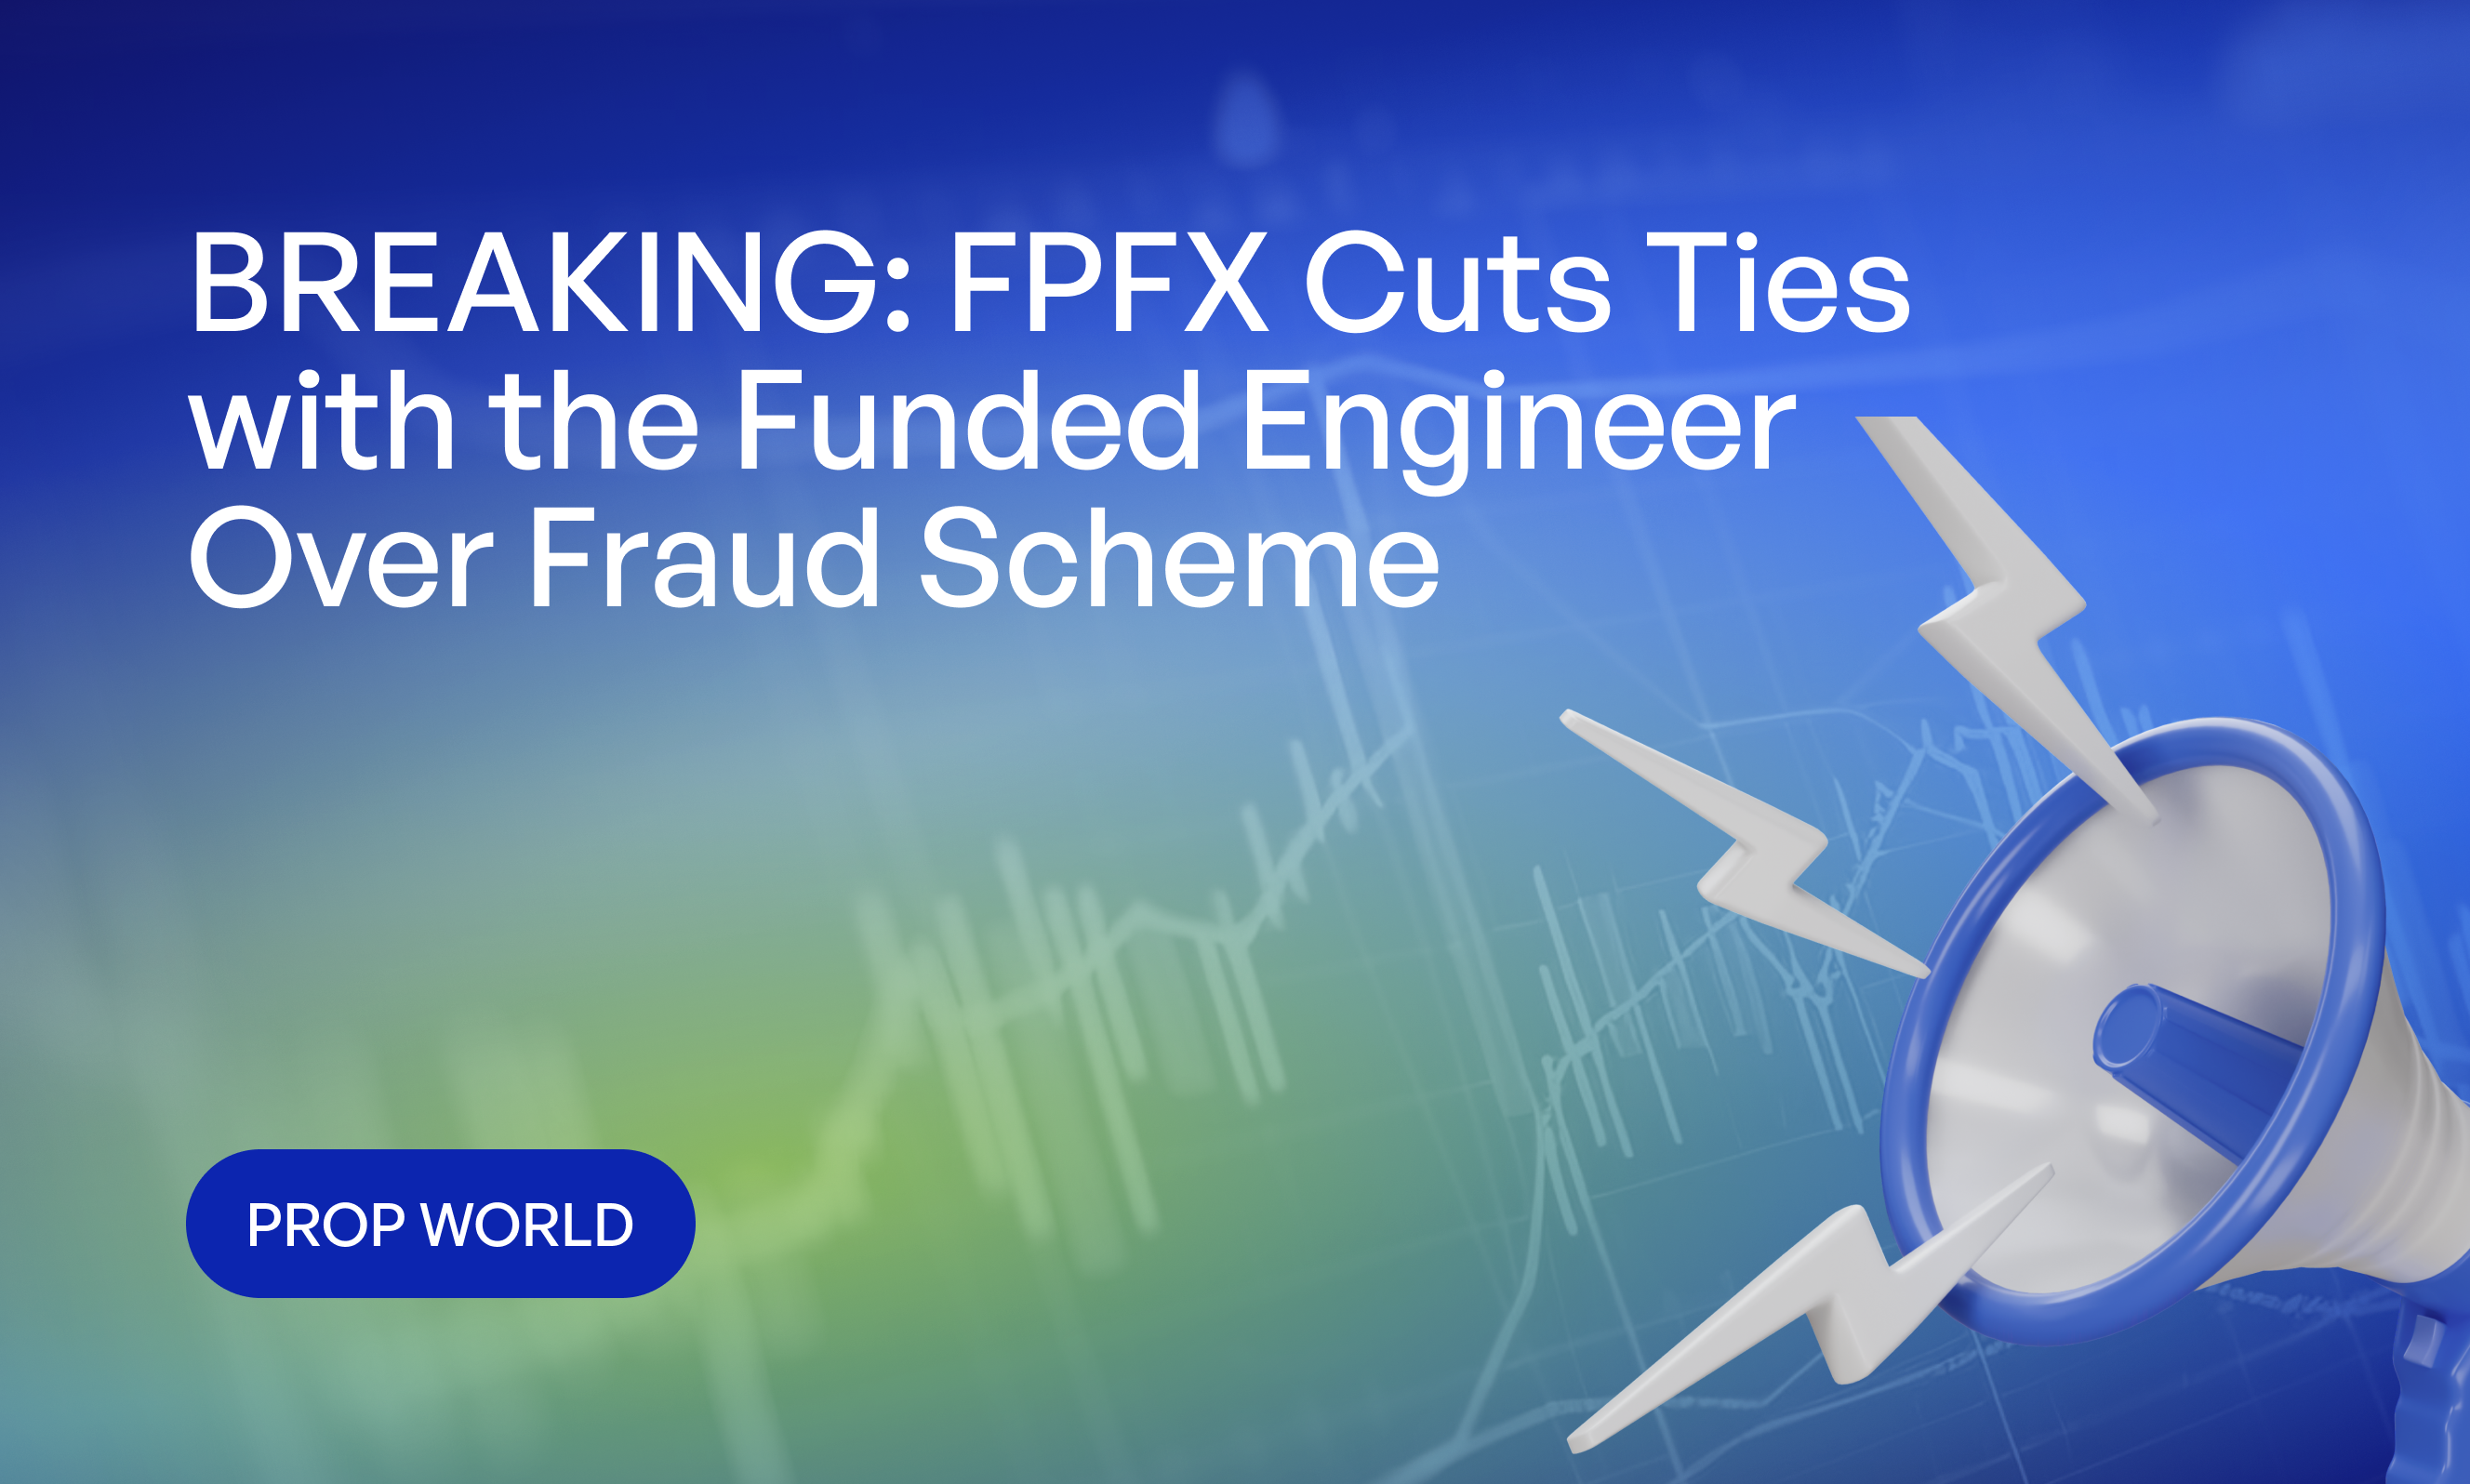 BREAKING: FPFX Cuts Ties with the Funded Engineer Over Fraud Scheme